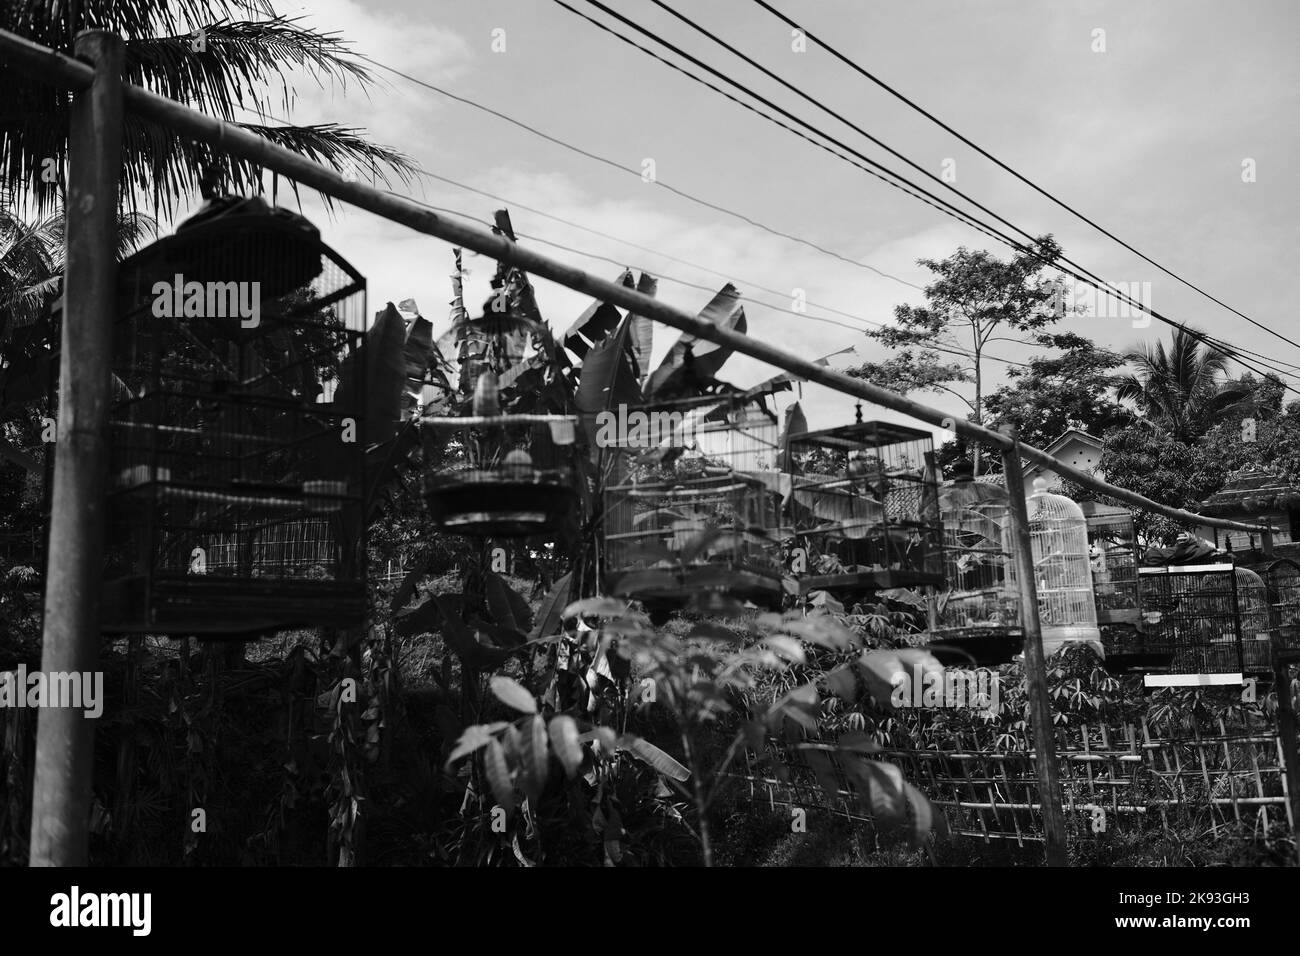 Black and white photo, Monochrome photo of a bird cage hanging on a rope in the Cikancung area - Indonesia Stock Photo